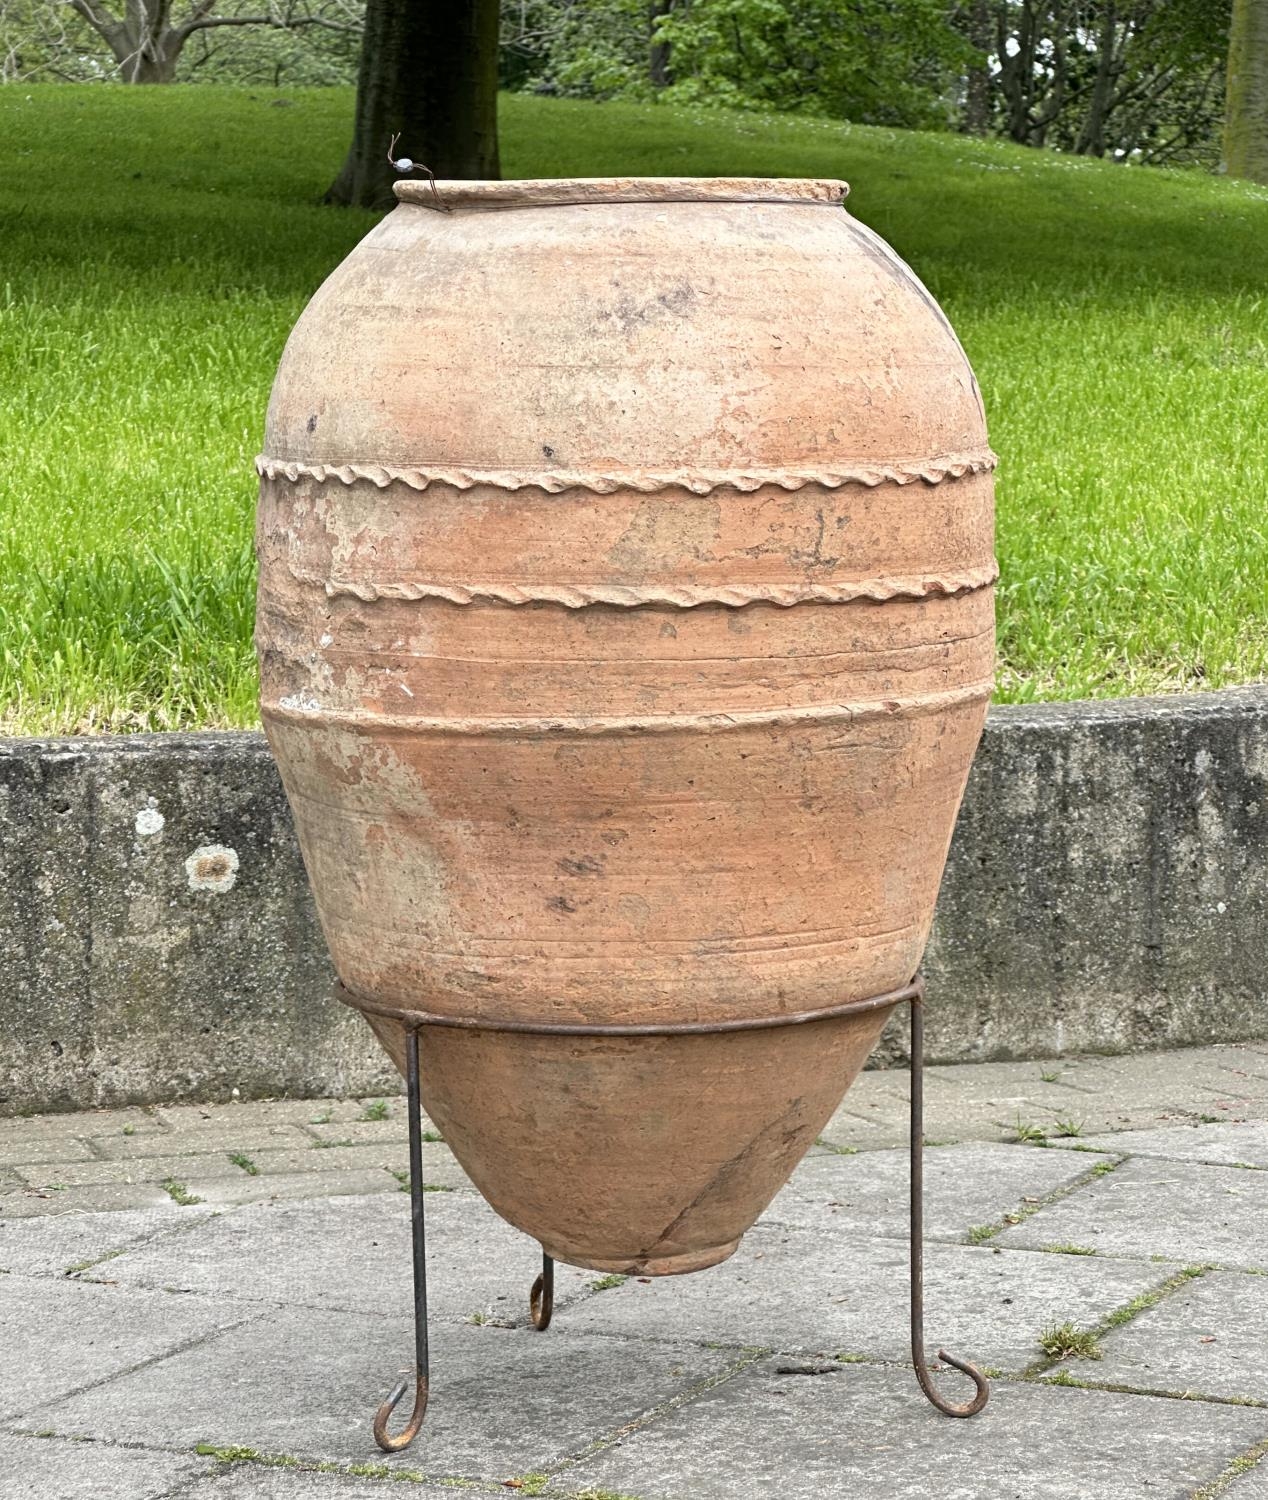 GARDEN OLIVE JAR, well weathered terracotta amphora, with pressed banded detail raised on wrought - Image 4 of 8